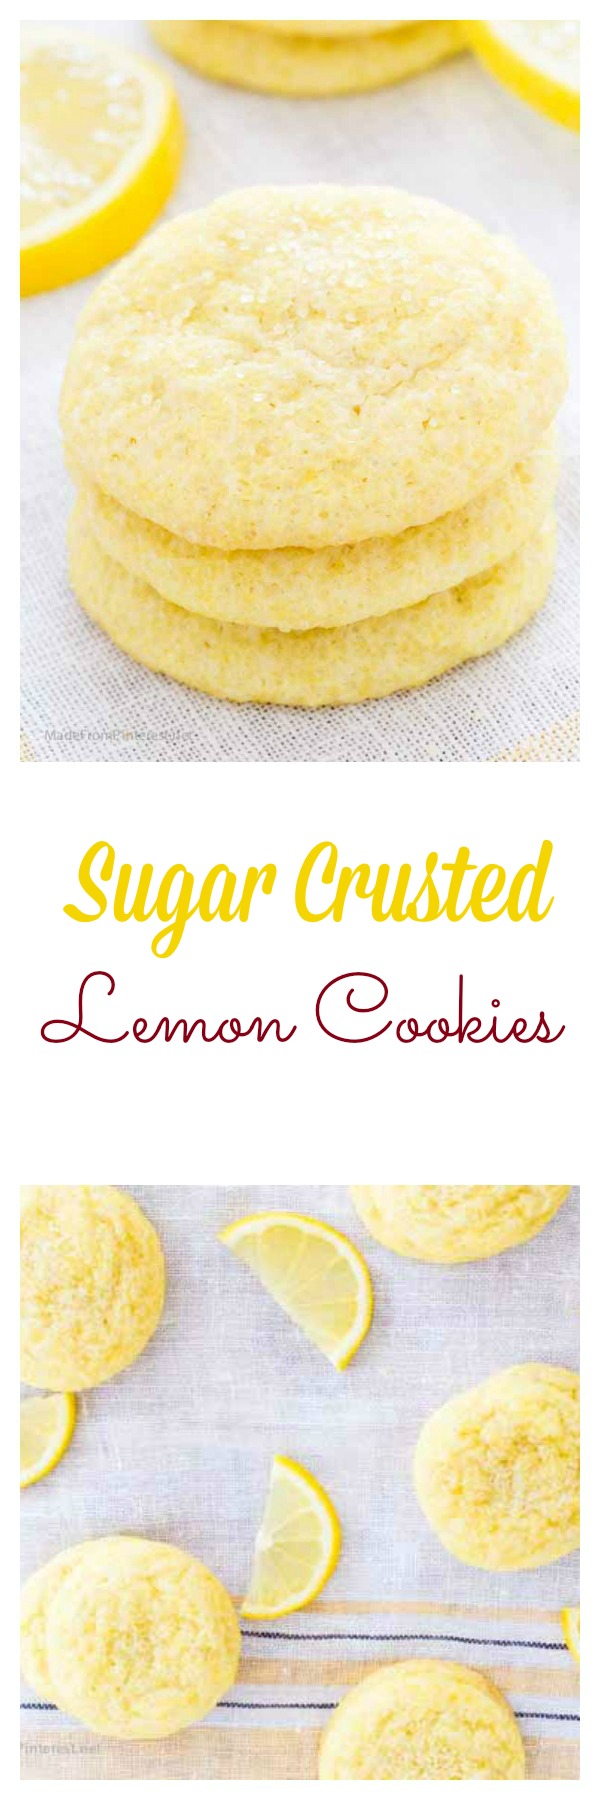 These Sugar Crusted Lemon Cookies were a family favorite growing up! 